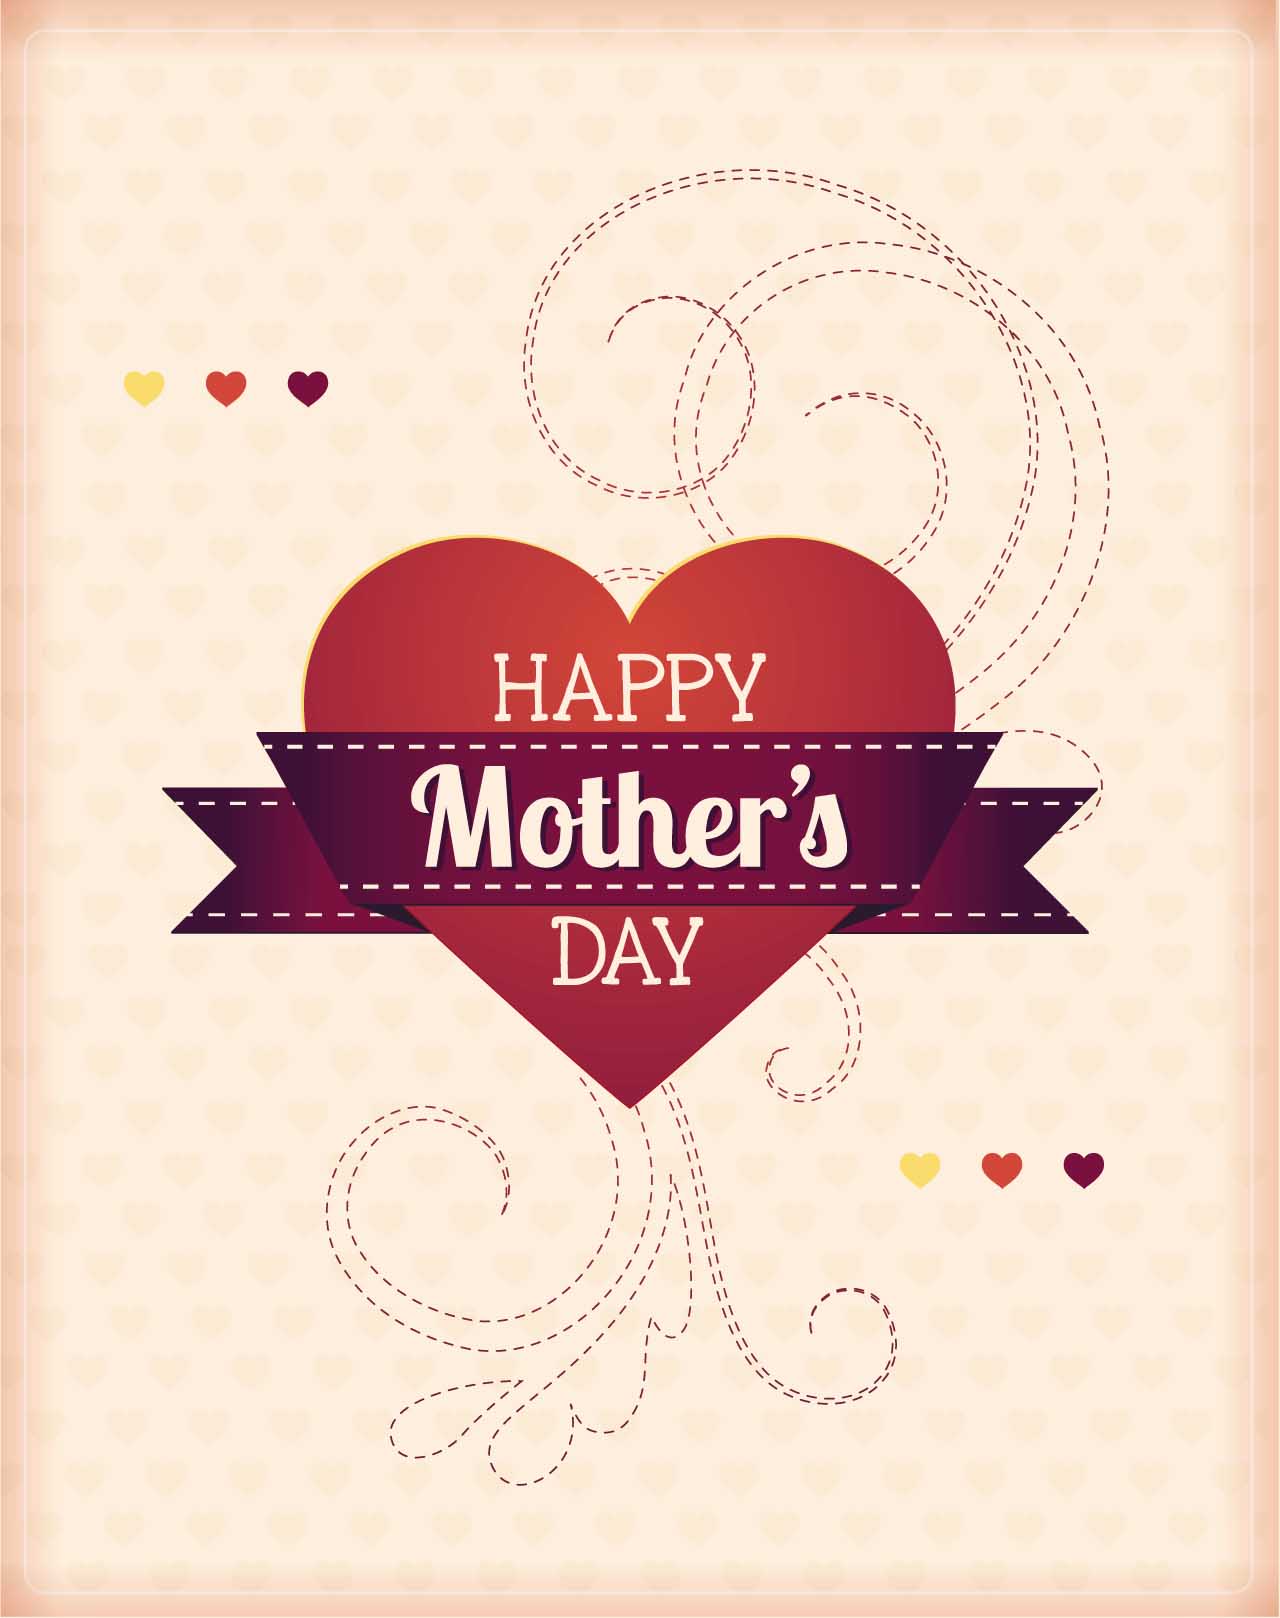 Mother's Day with hearts card vector | Free download